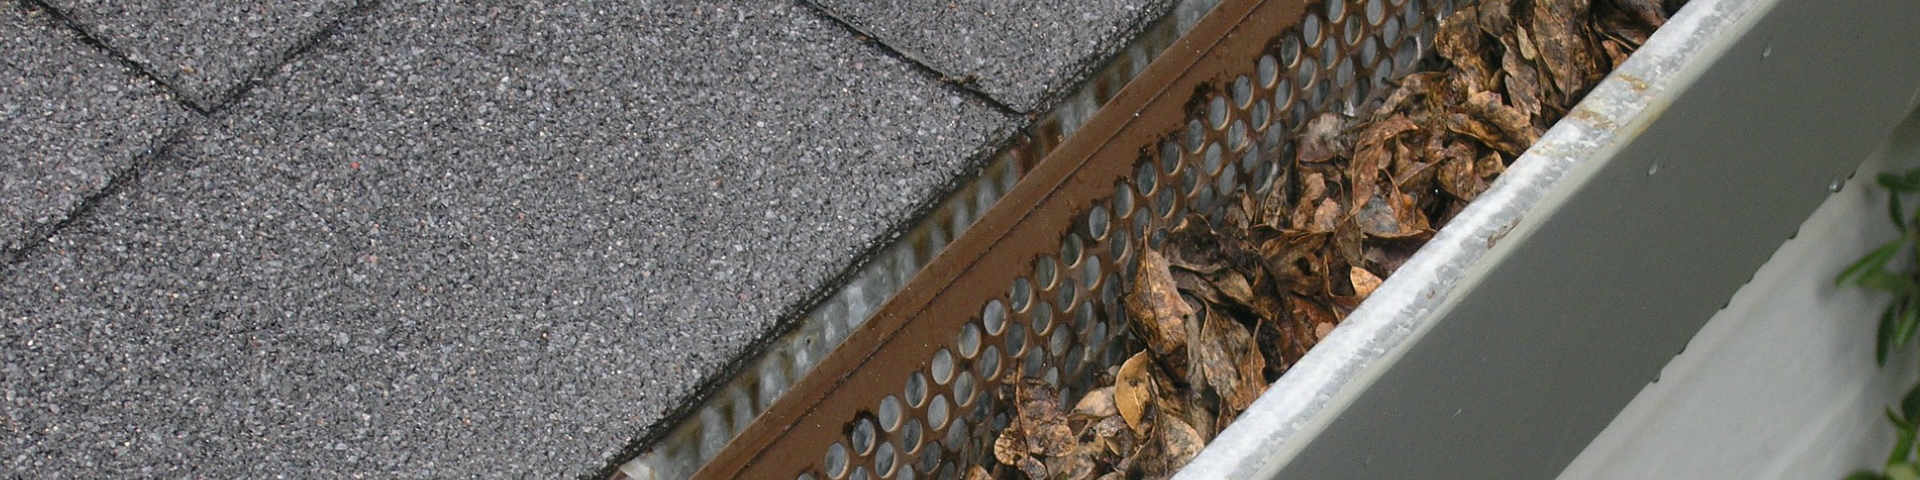 home Gutter Cleaning Services Westchester ny